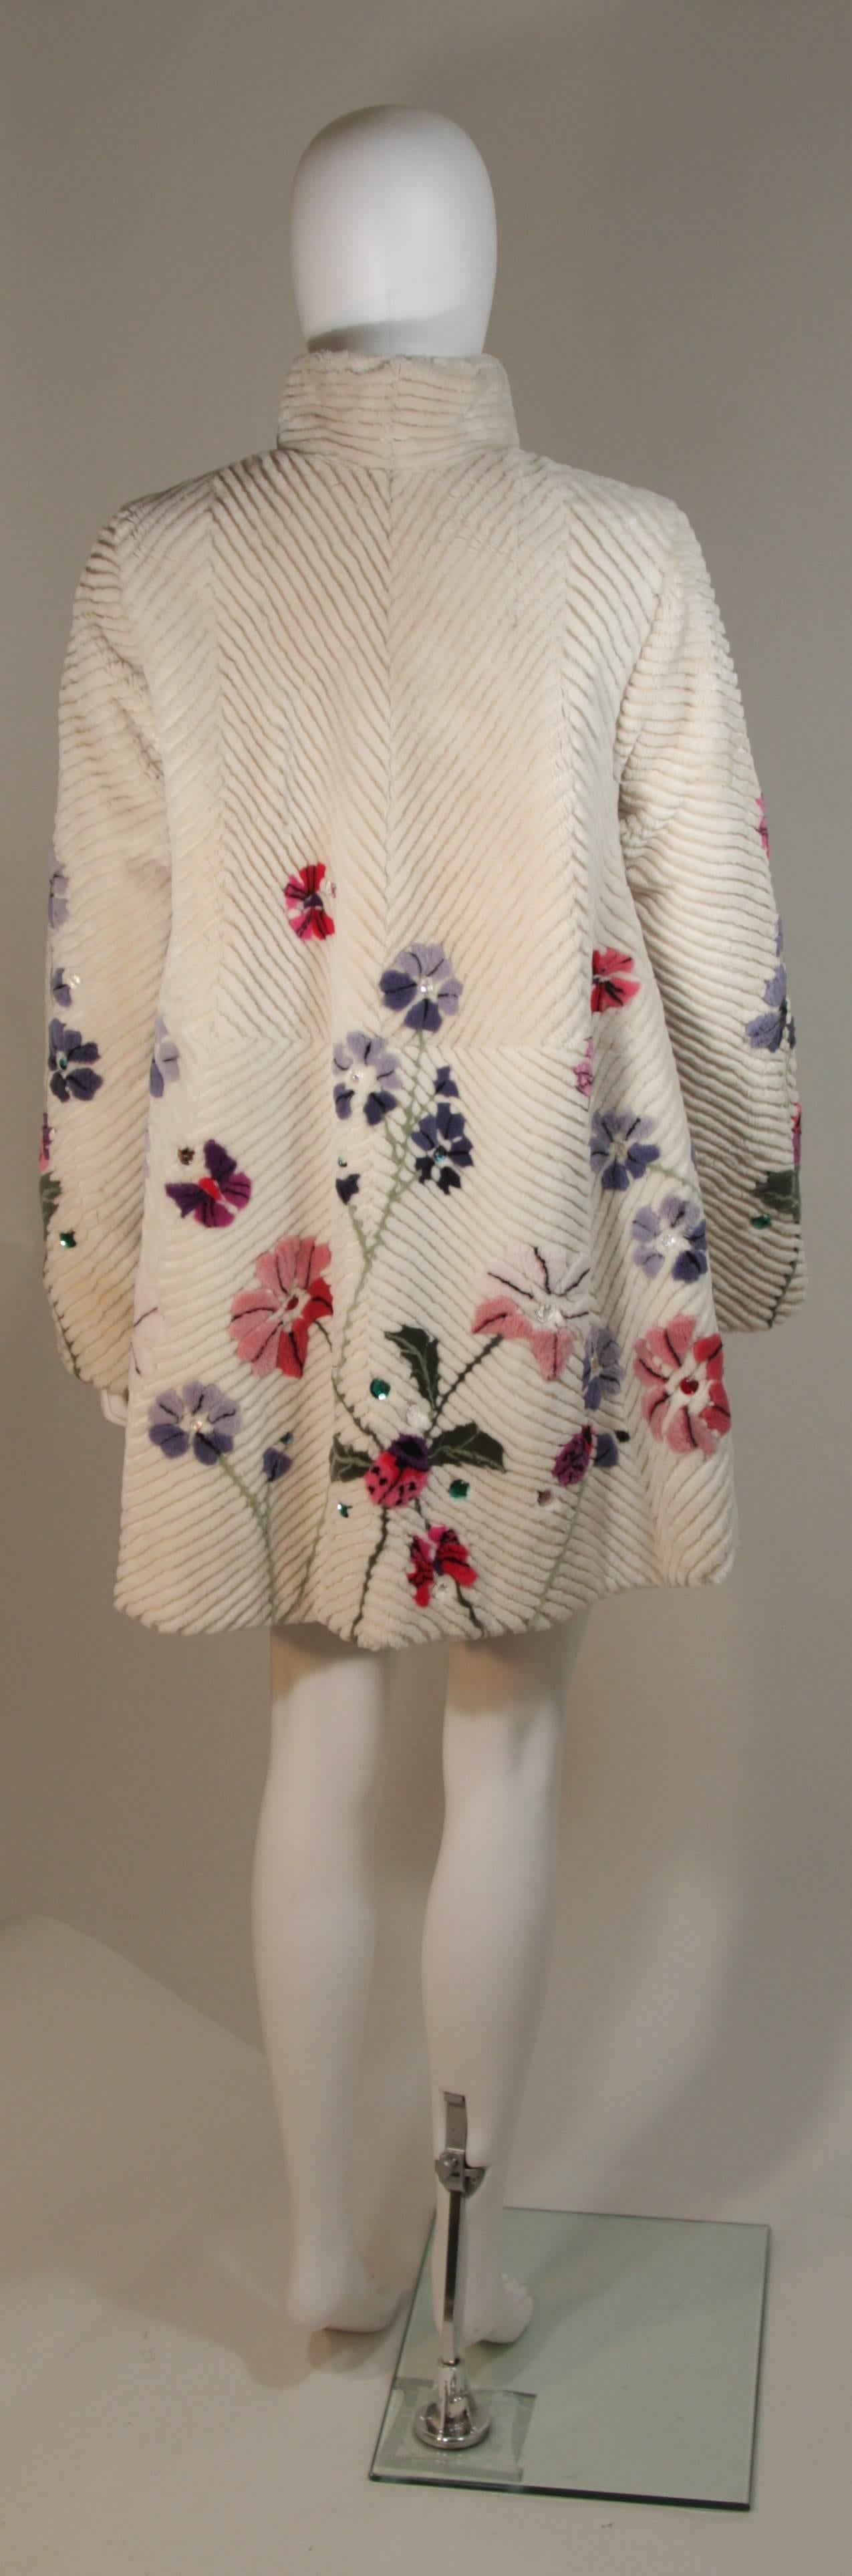 ZUKI 'Lavender Garden' Floral Fawn Sheared Beaver Coat Made to Order For Sale 1